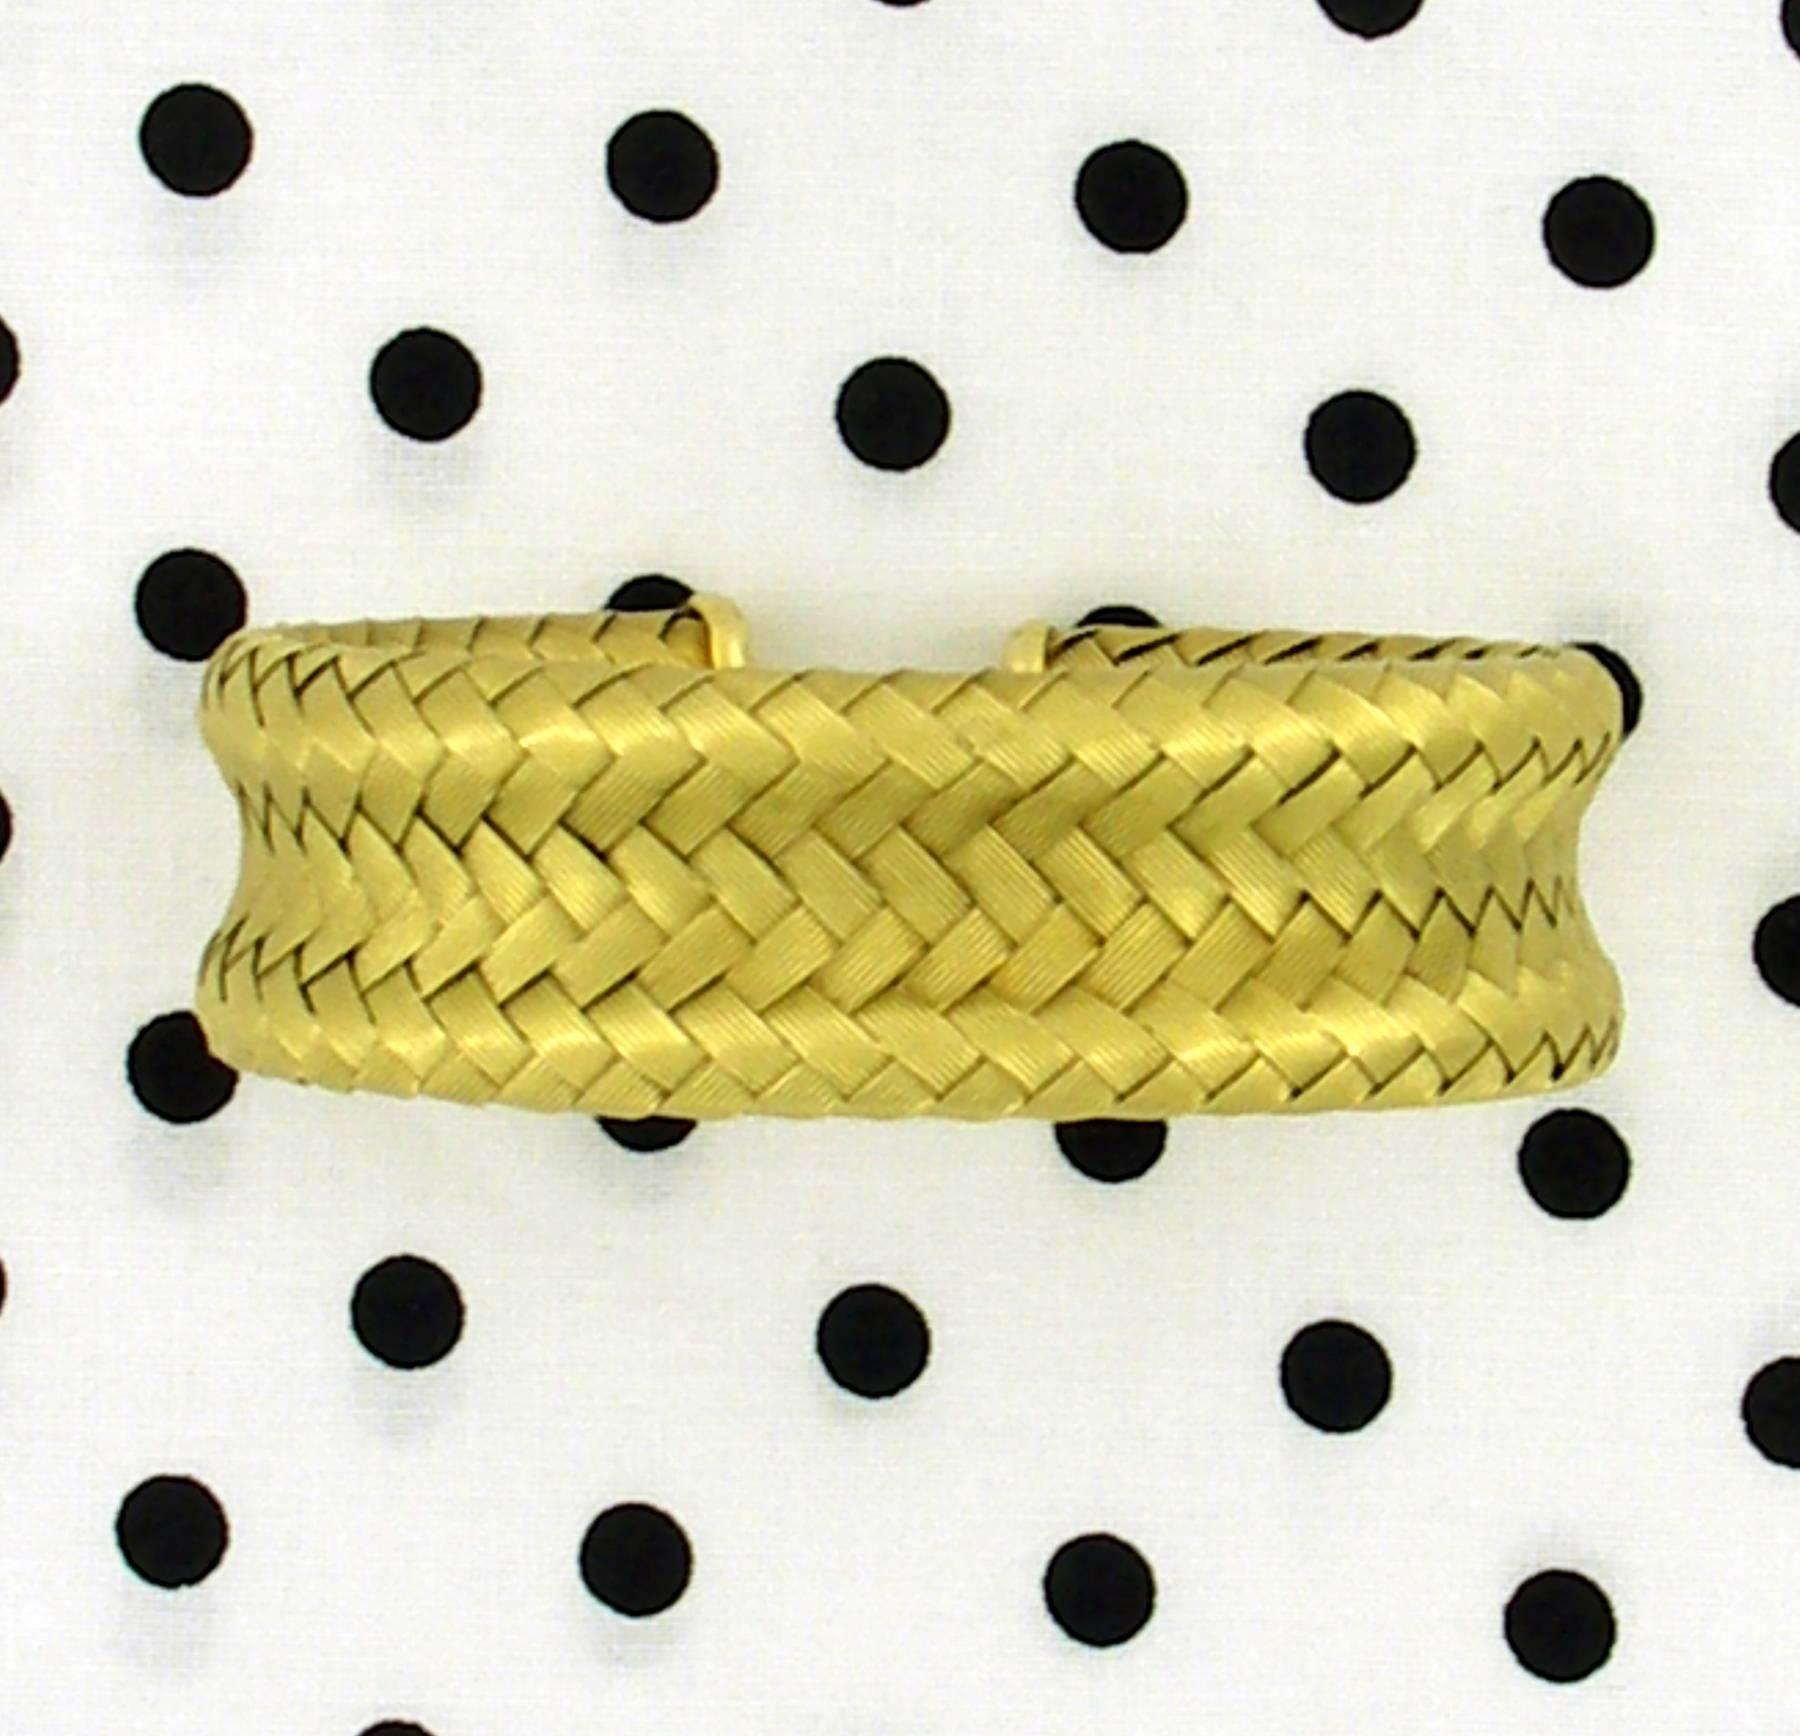 An 18K yellow gold cuff, with a basket weave design, measuring 7/8 of an inch wide with an inside circumference of 7 inches. Bracelet's hallmark denotes manufacture in Vicenza, Italy.